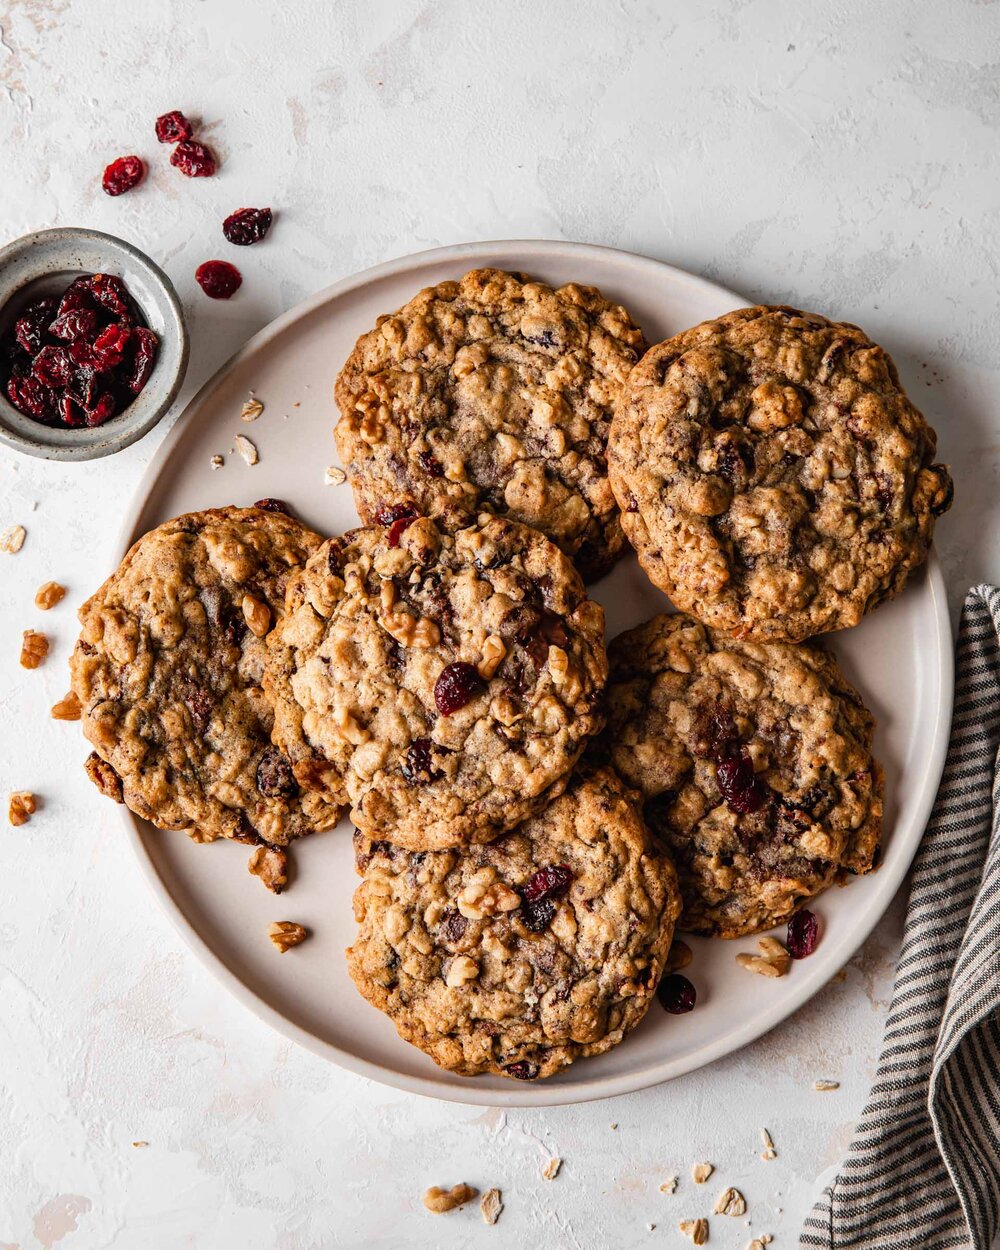 A plate of giant oatmeal cookies with dried cranberries and chocolate chips.